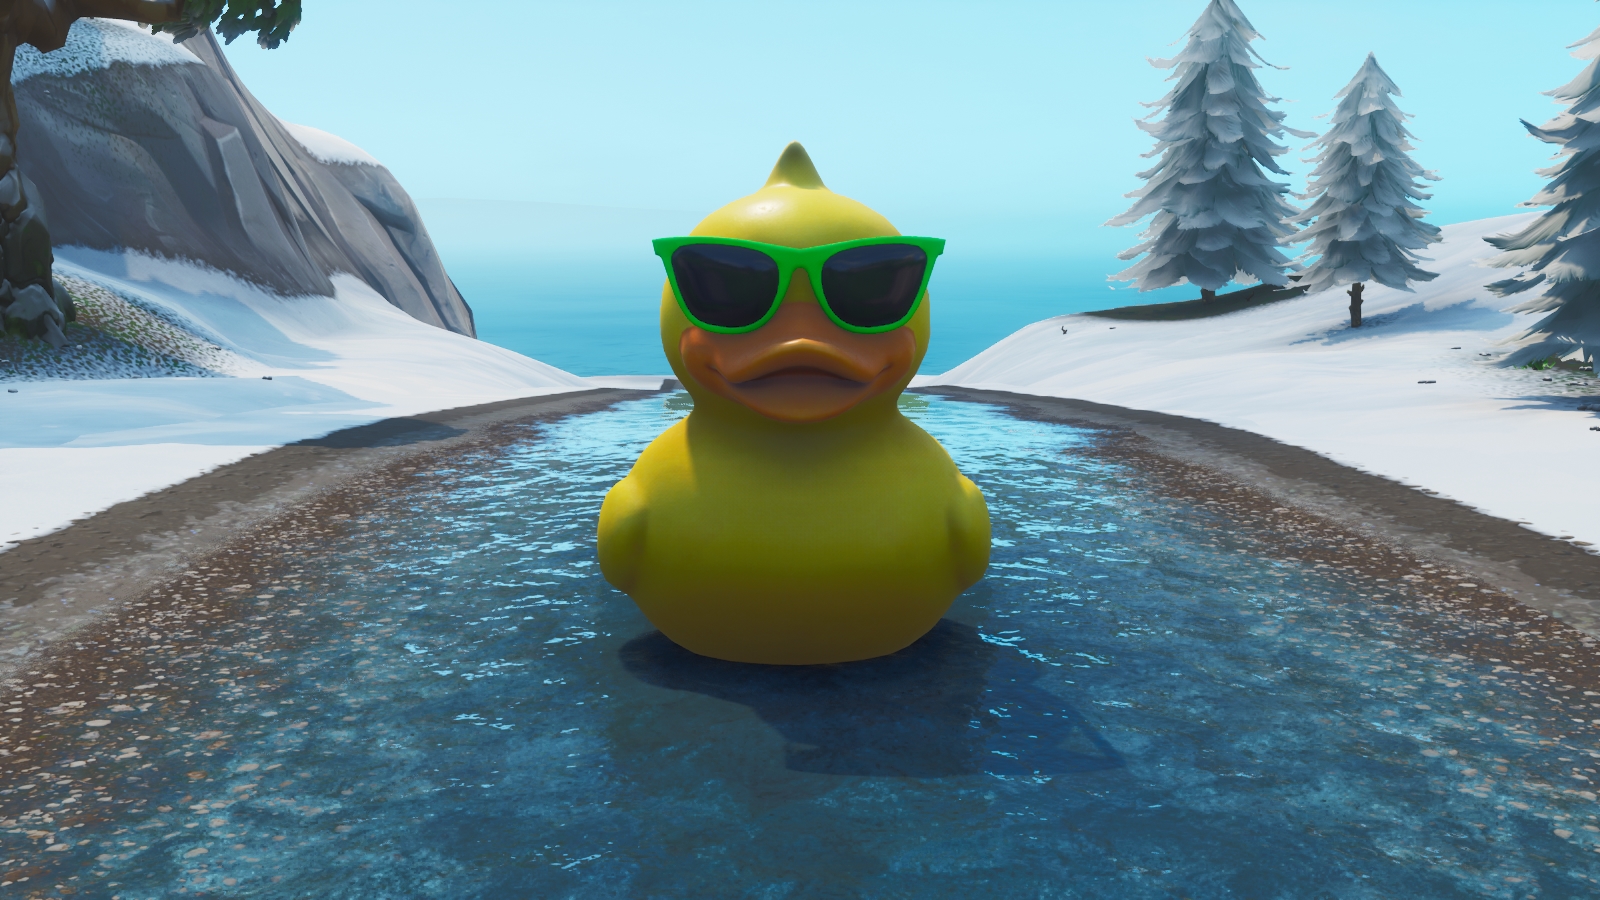 Visit A Giant Beach Umbrella And A Huge Rubber Ducky In A ... - 1600 x 900 jpeg 964kB